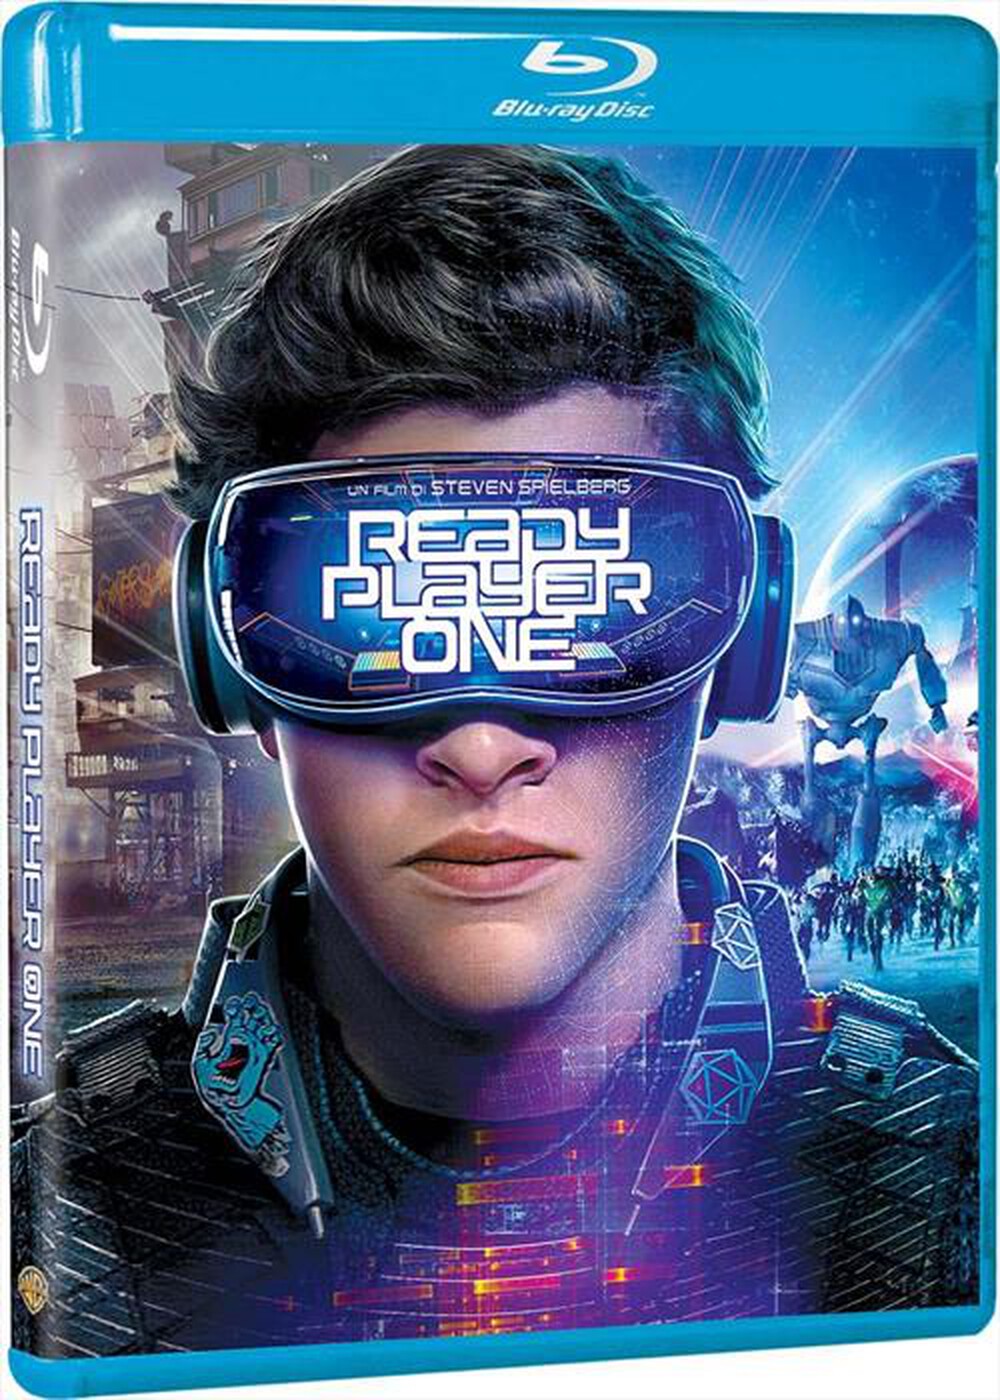 "WARNER HOME VIDEO - Ready Player One"